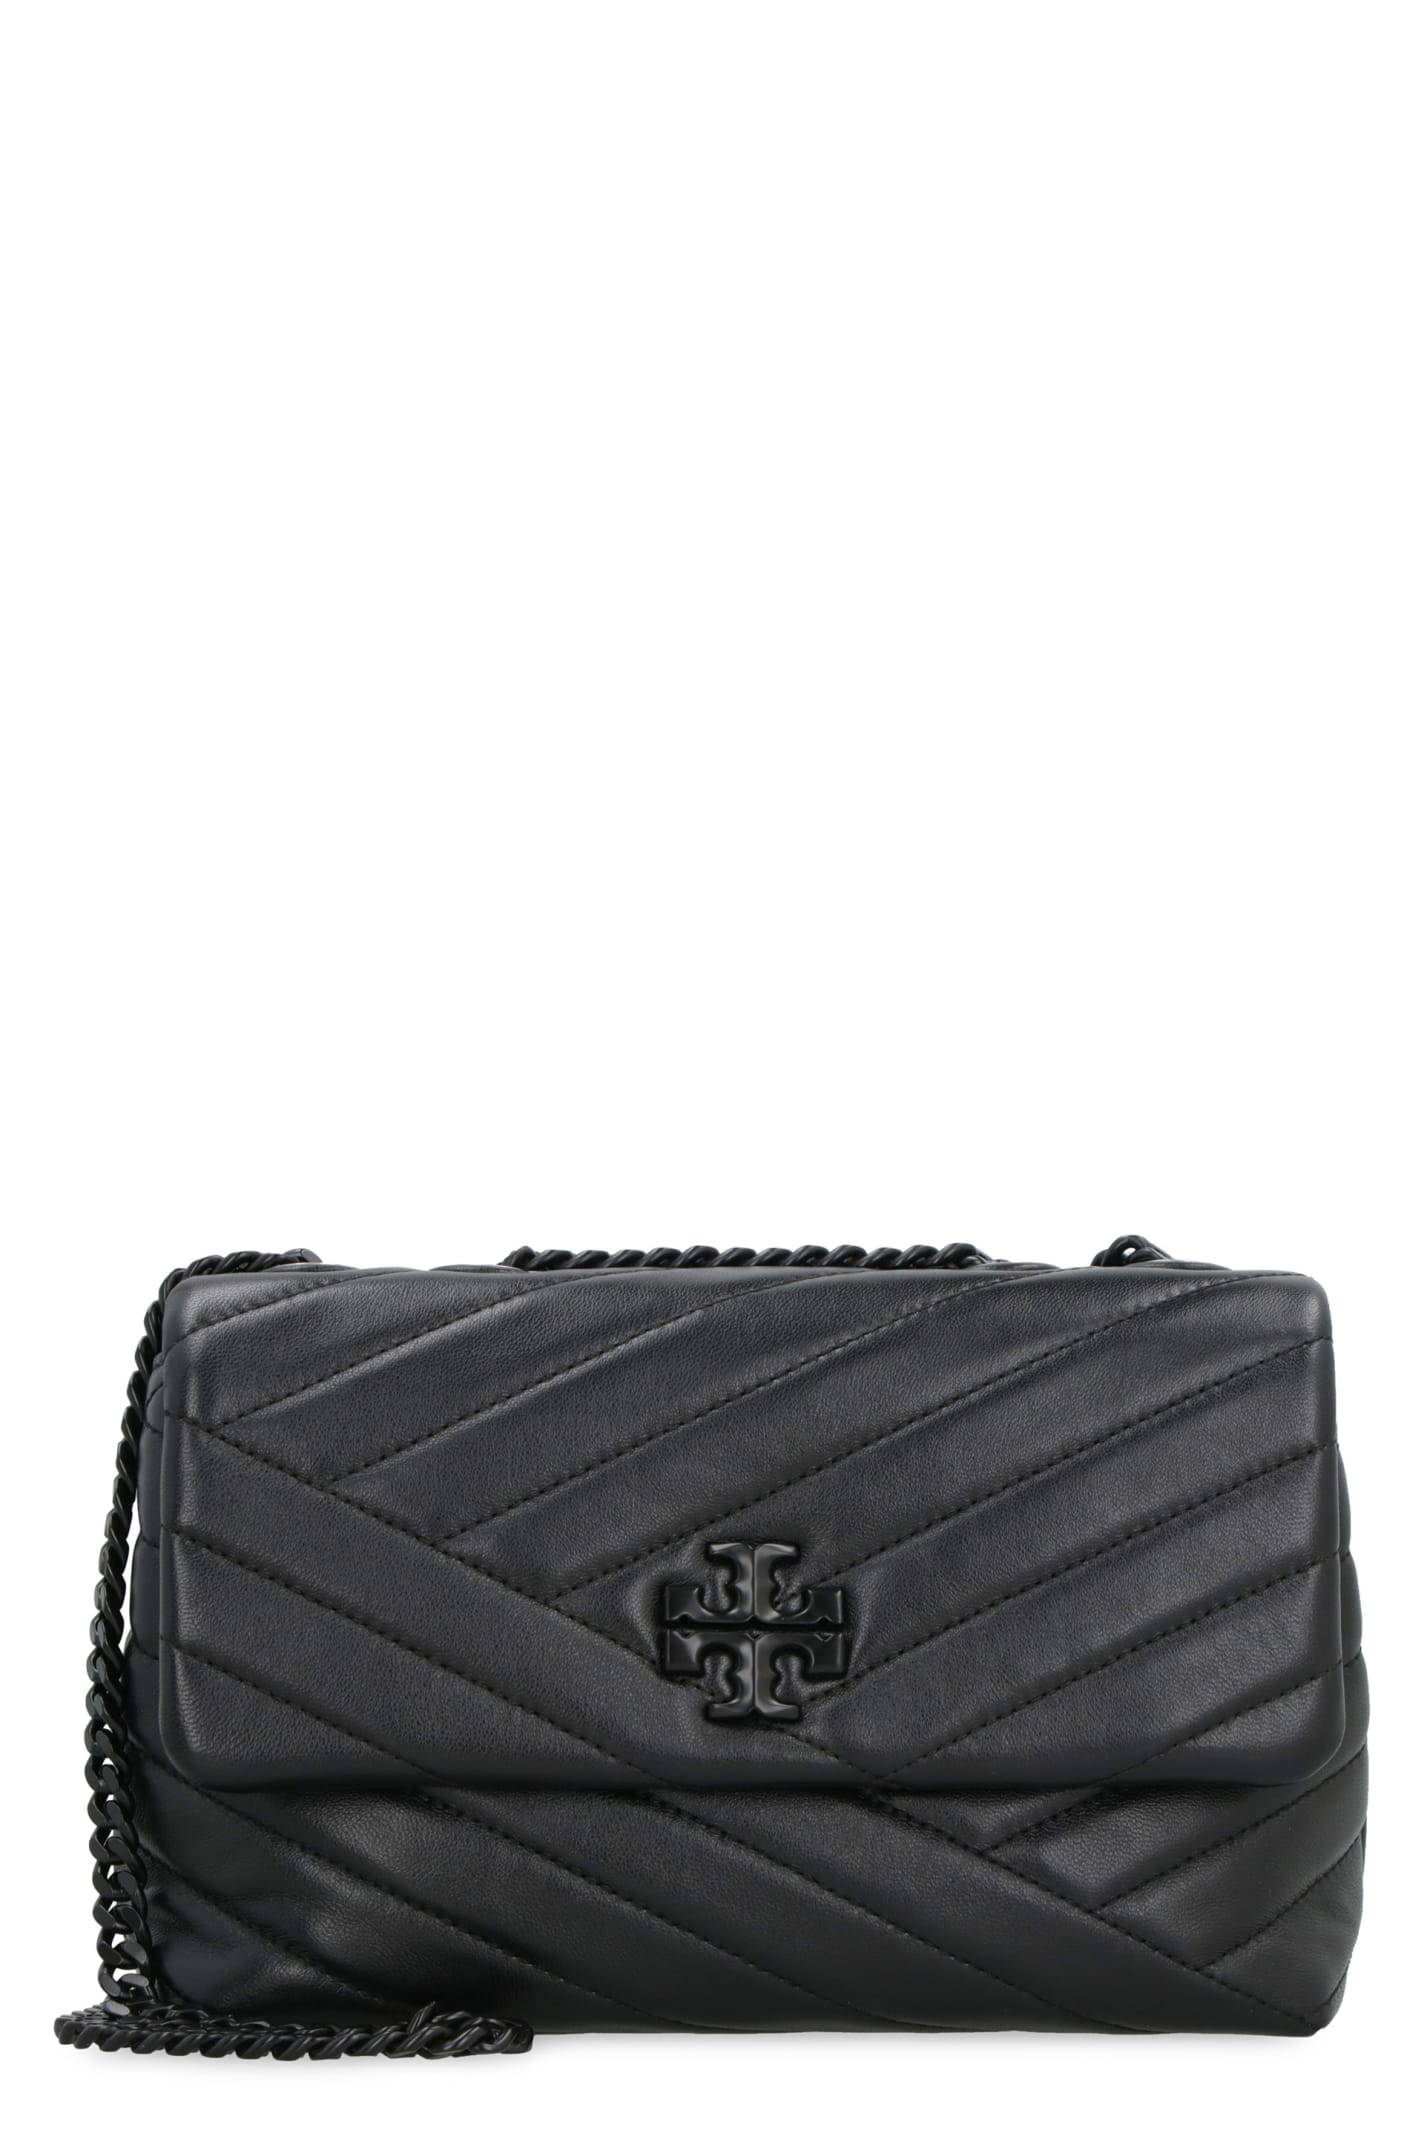 TORY BURCH KIRA QUILTED LEATHER BAG